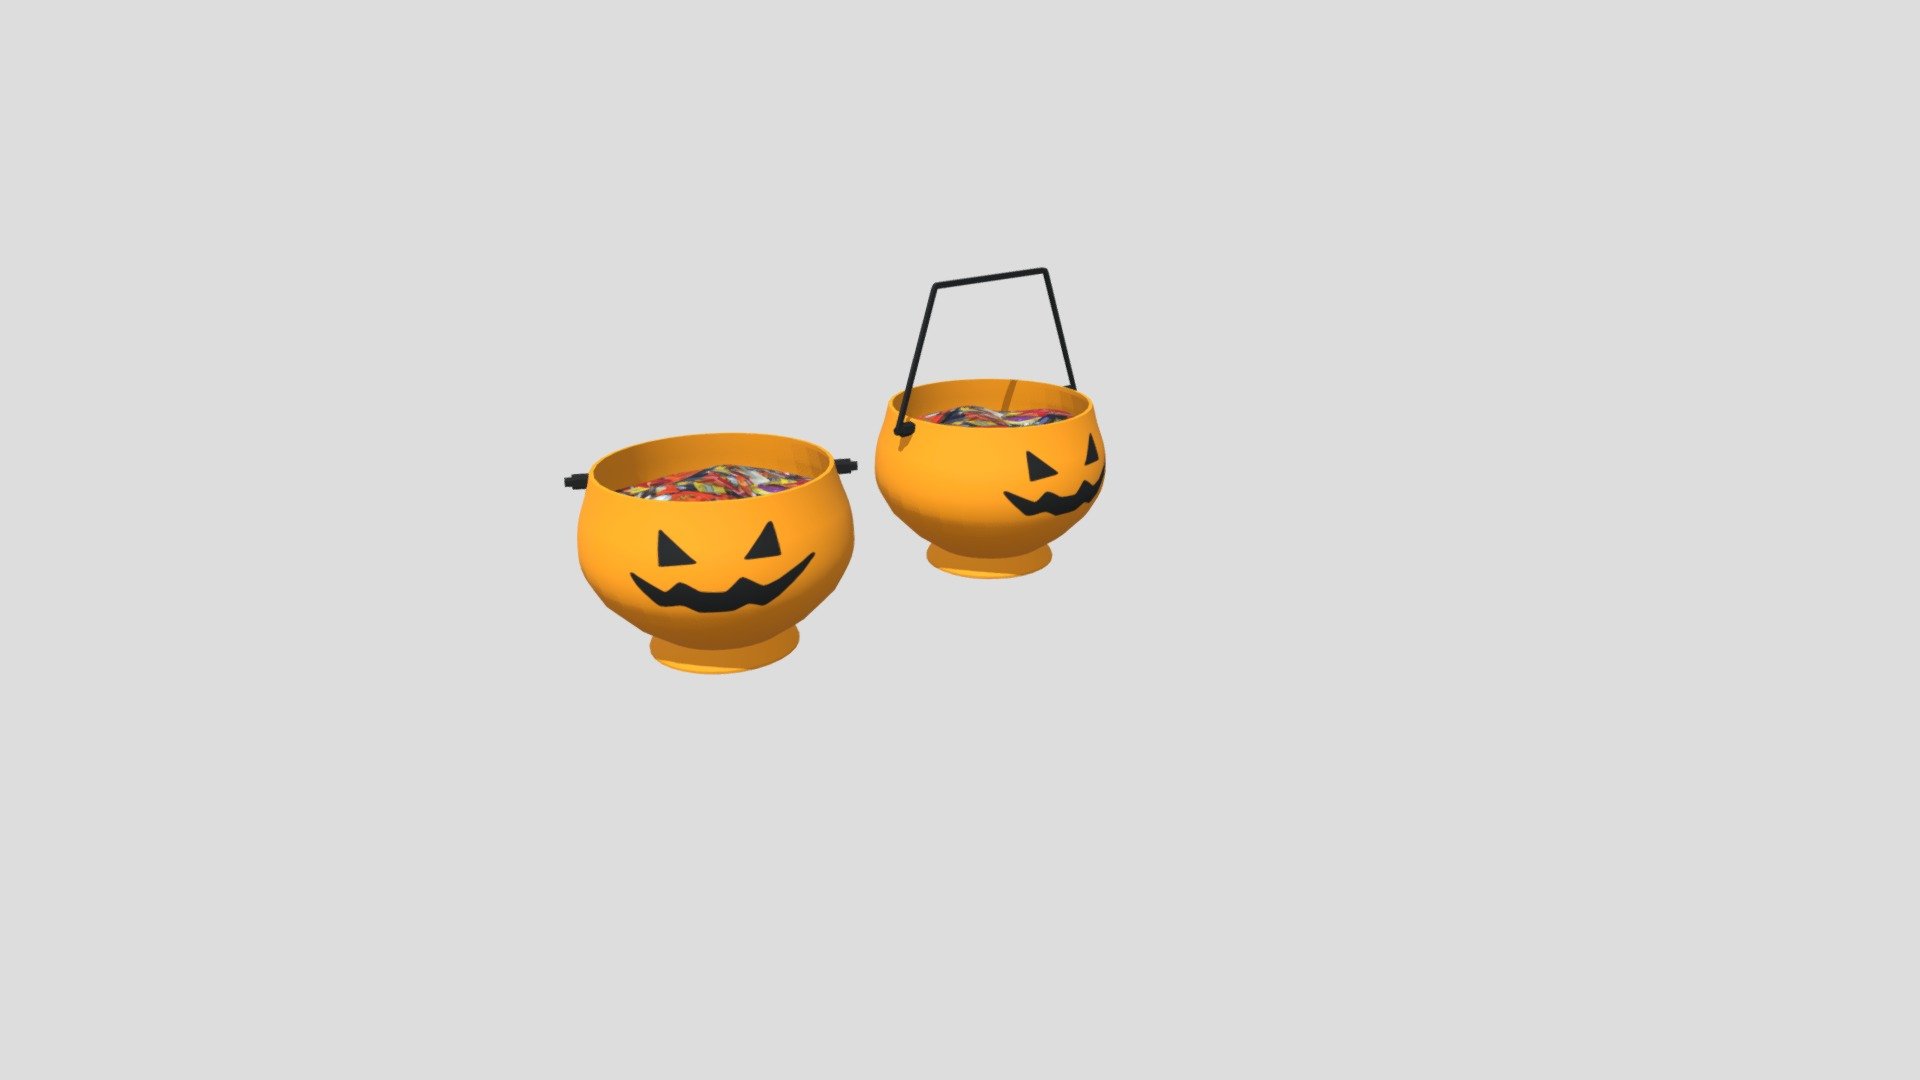 Candy Bowl for the spooky season of Halloween! - Candy Bowl for Halloween - 3D model by acecrypto8 3d model